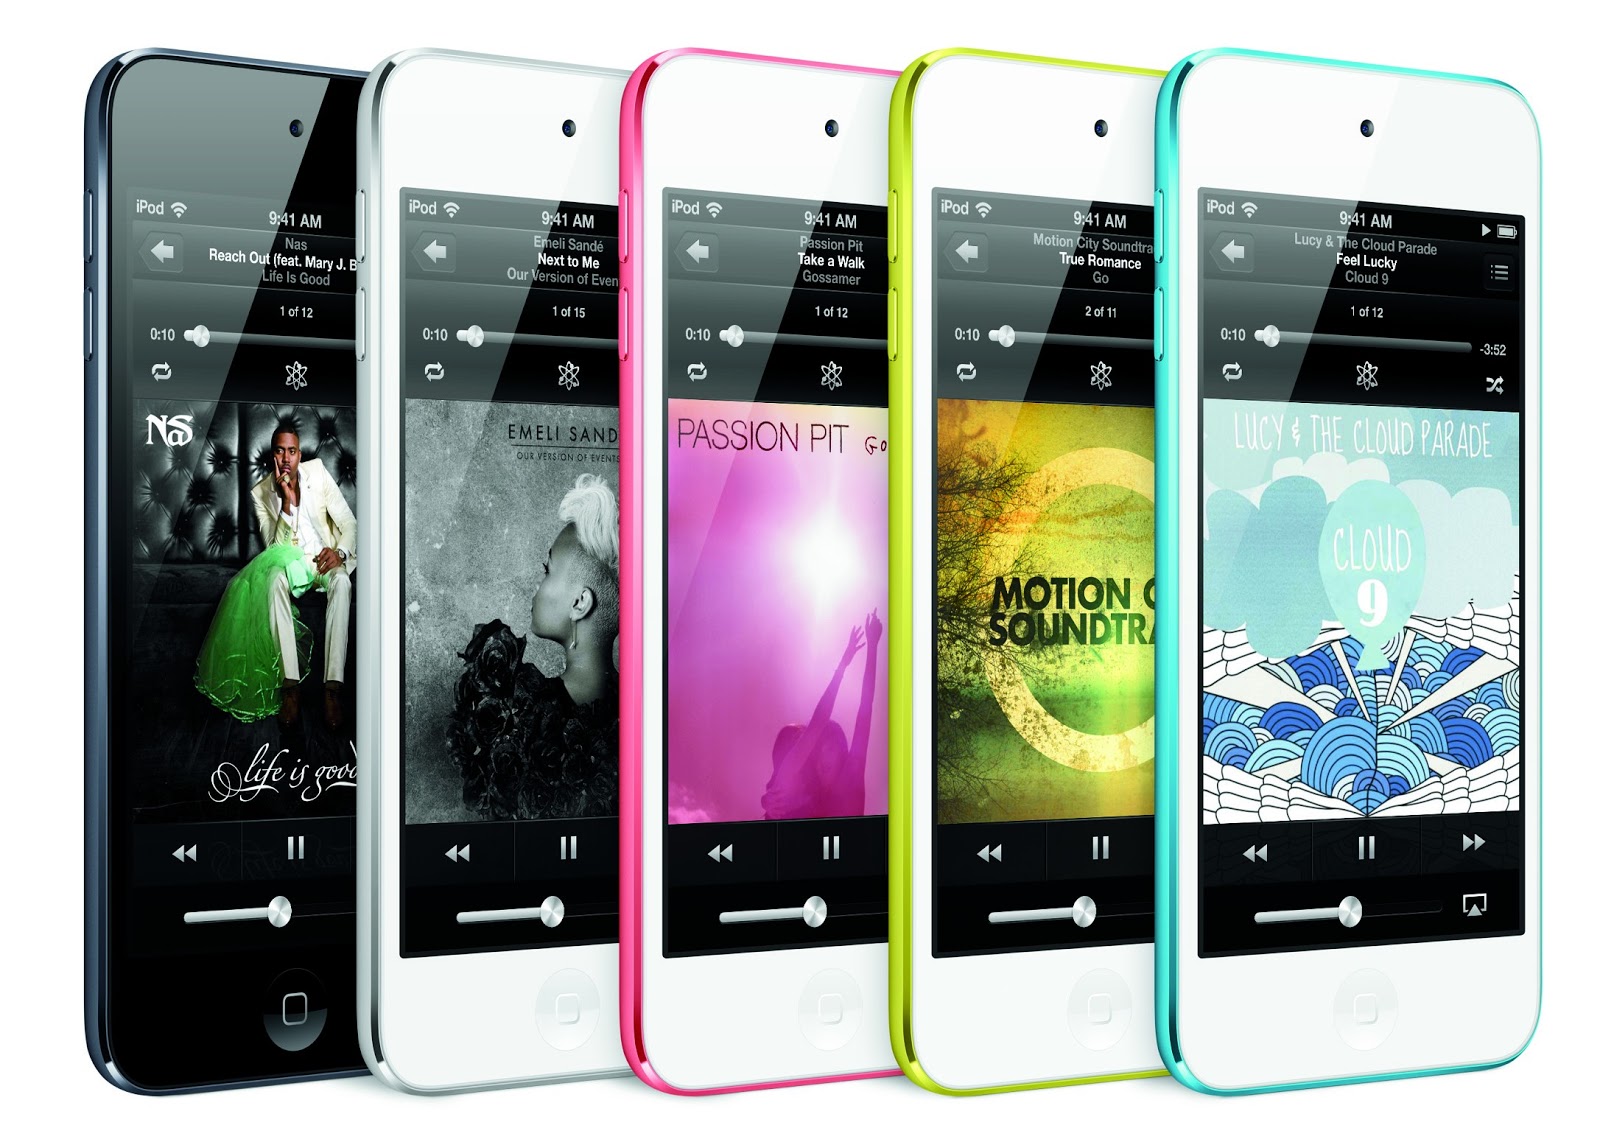 Apple iPod Touch 5th Generation: A quick review - The Gadgetier